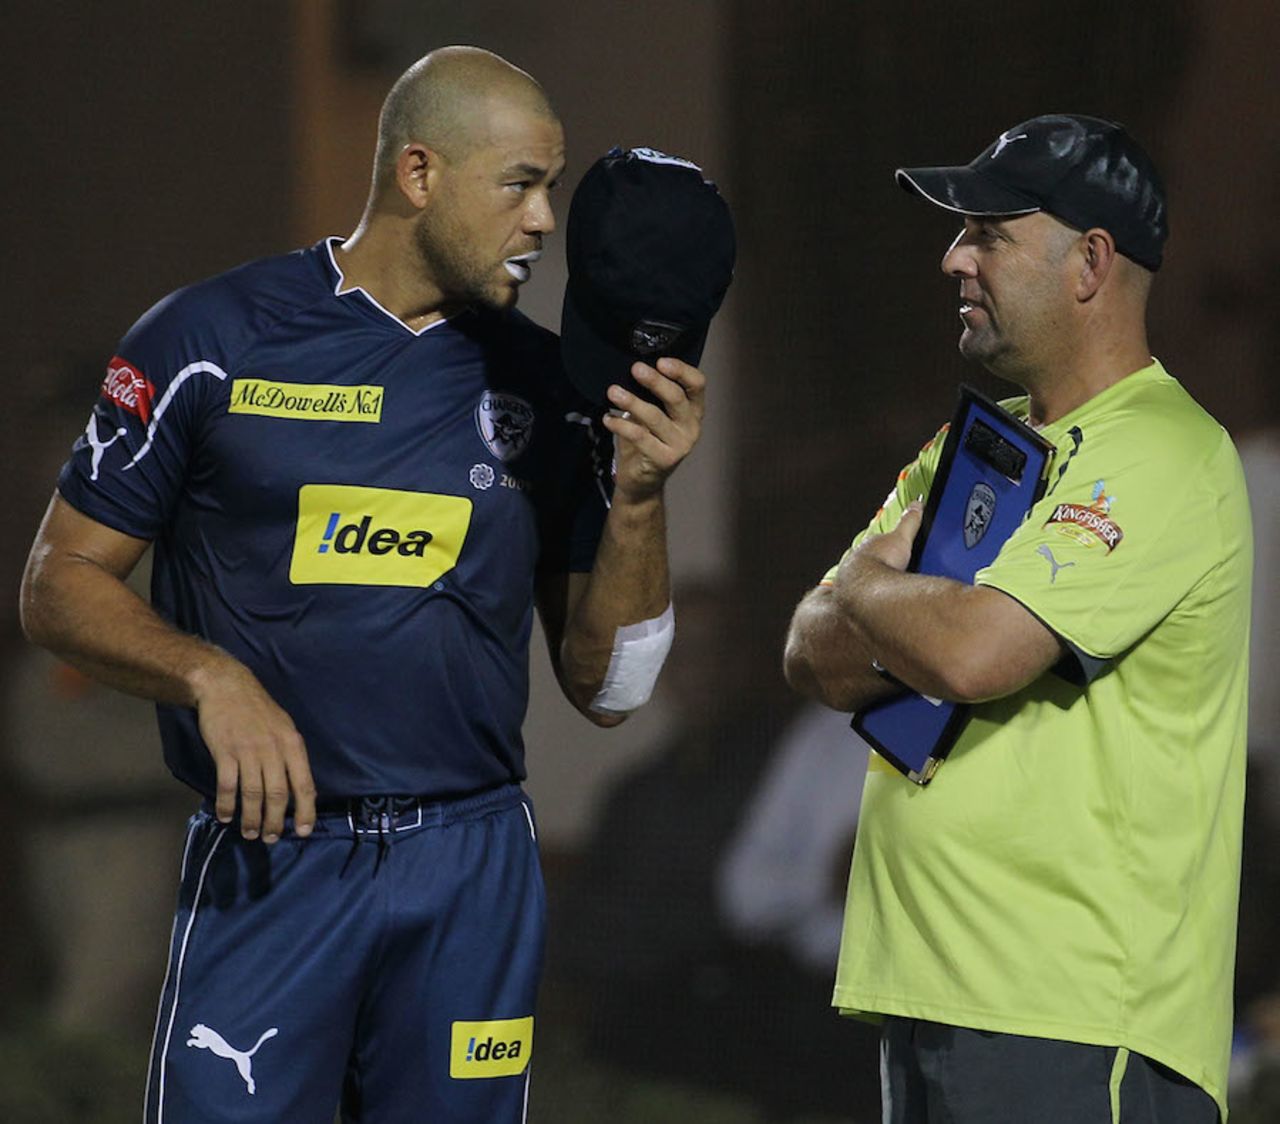 Andrew Symonds and Darren Lehmann chat on the sidelines, Mumbai Indians v Deccan Chargers, IPL, Mumbai, Apr 3, 2010